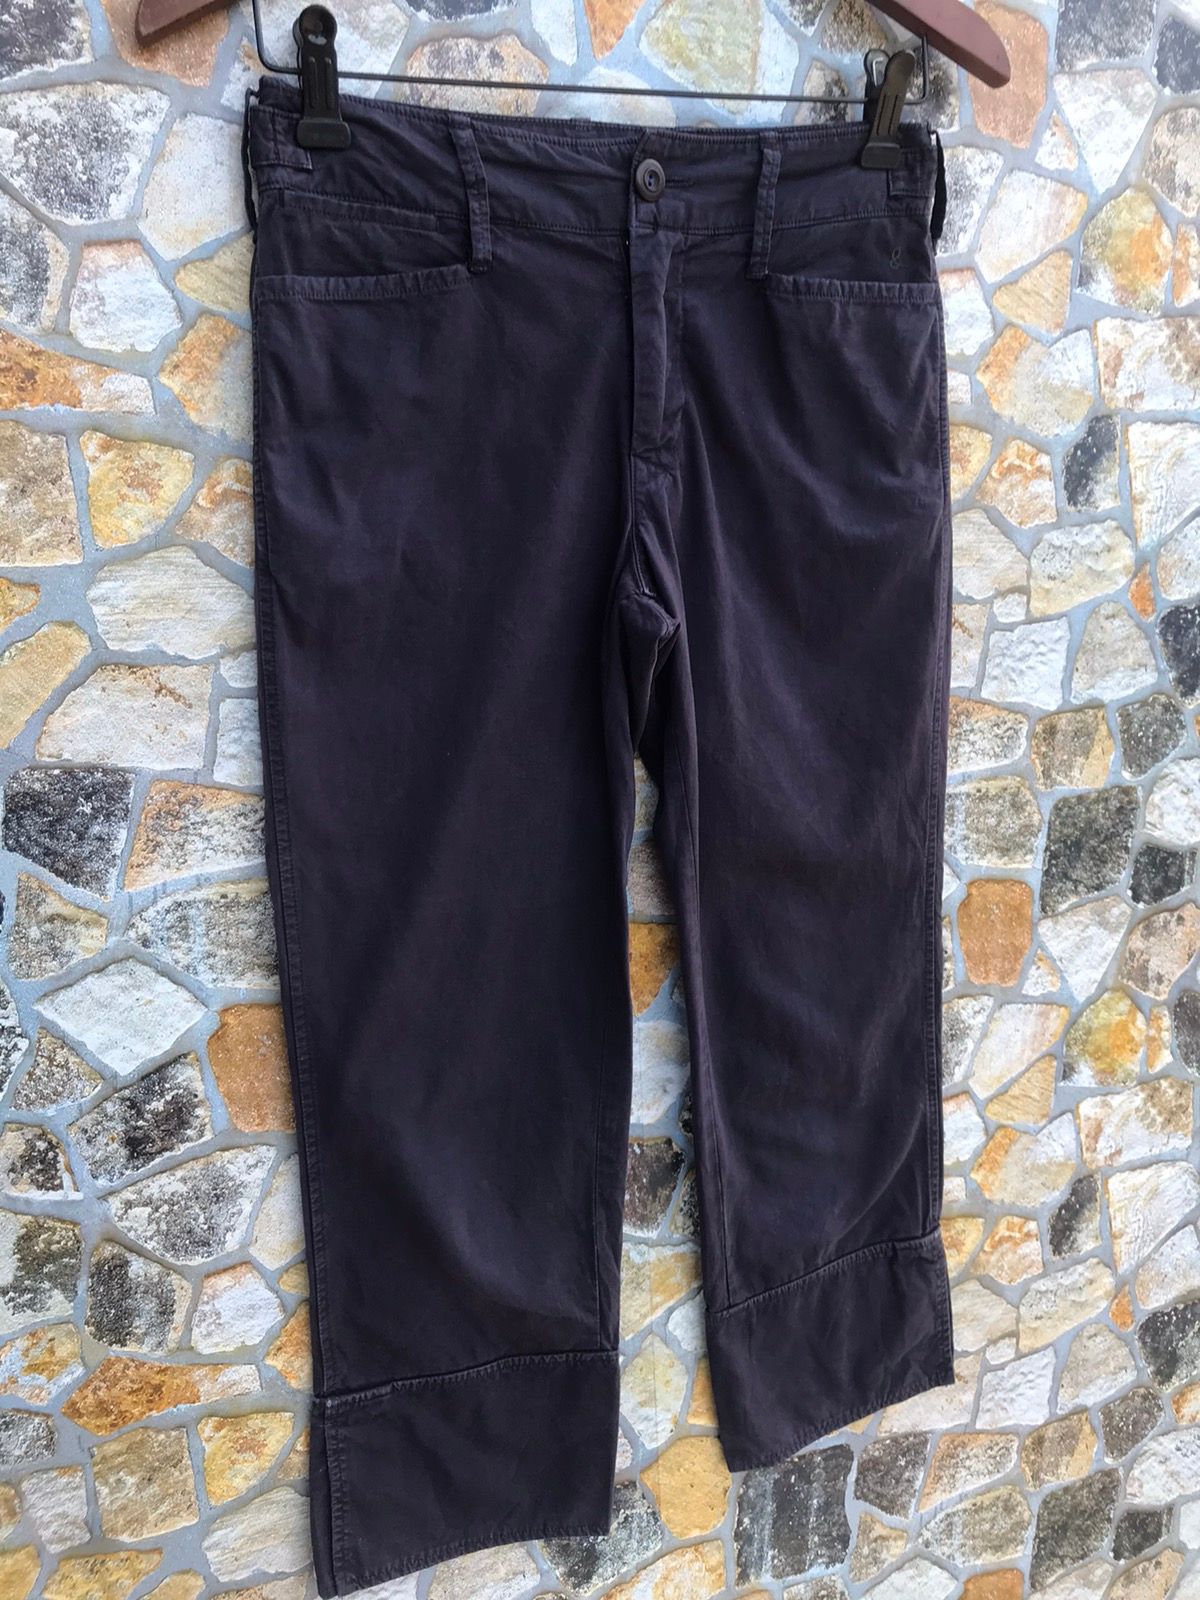 45Rpm Pants Made In Japan - 4